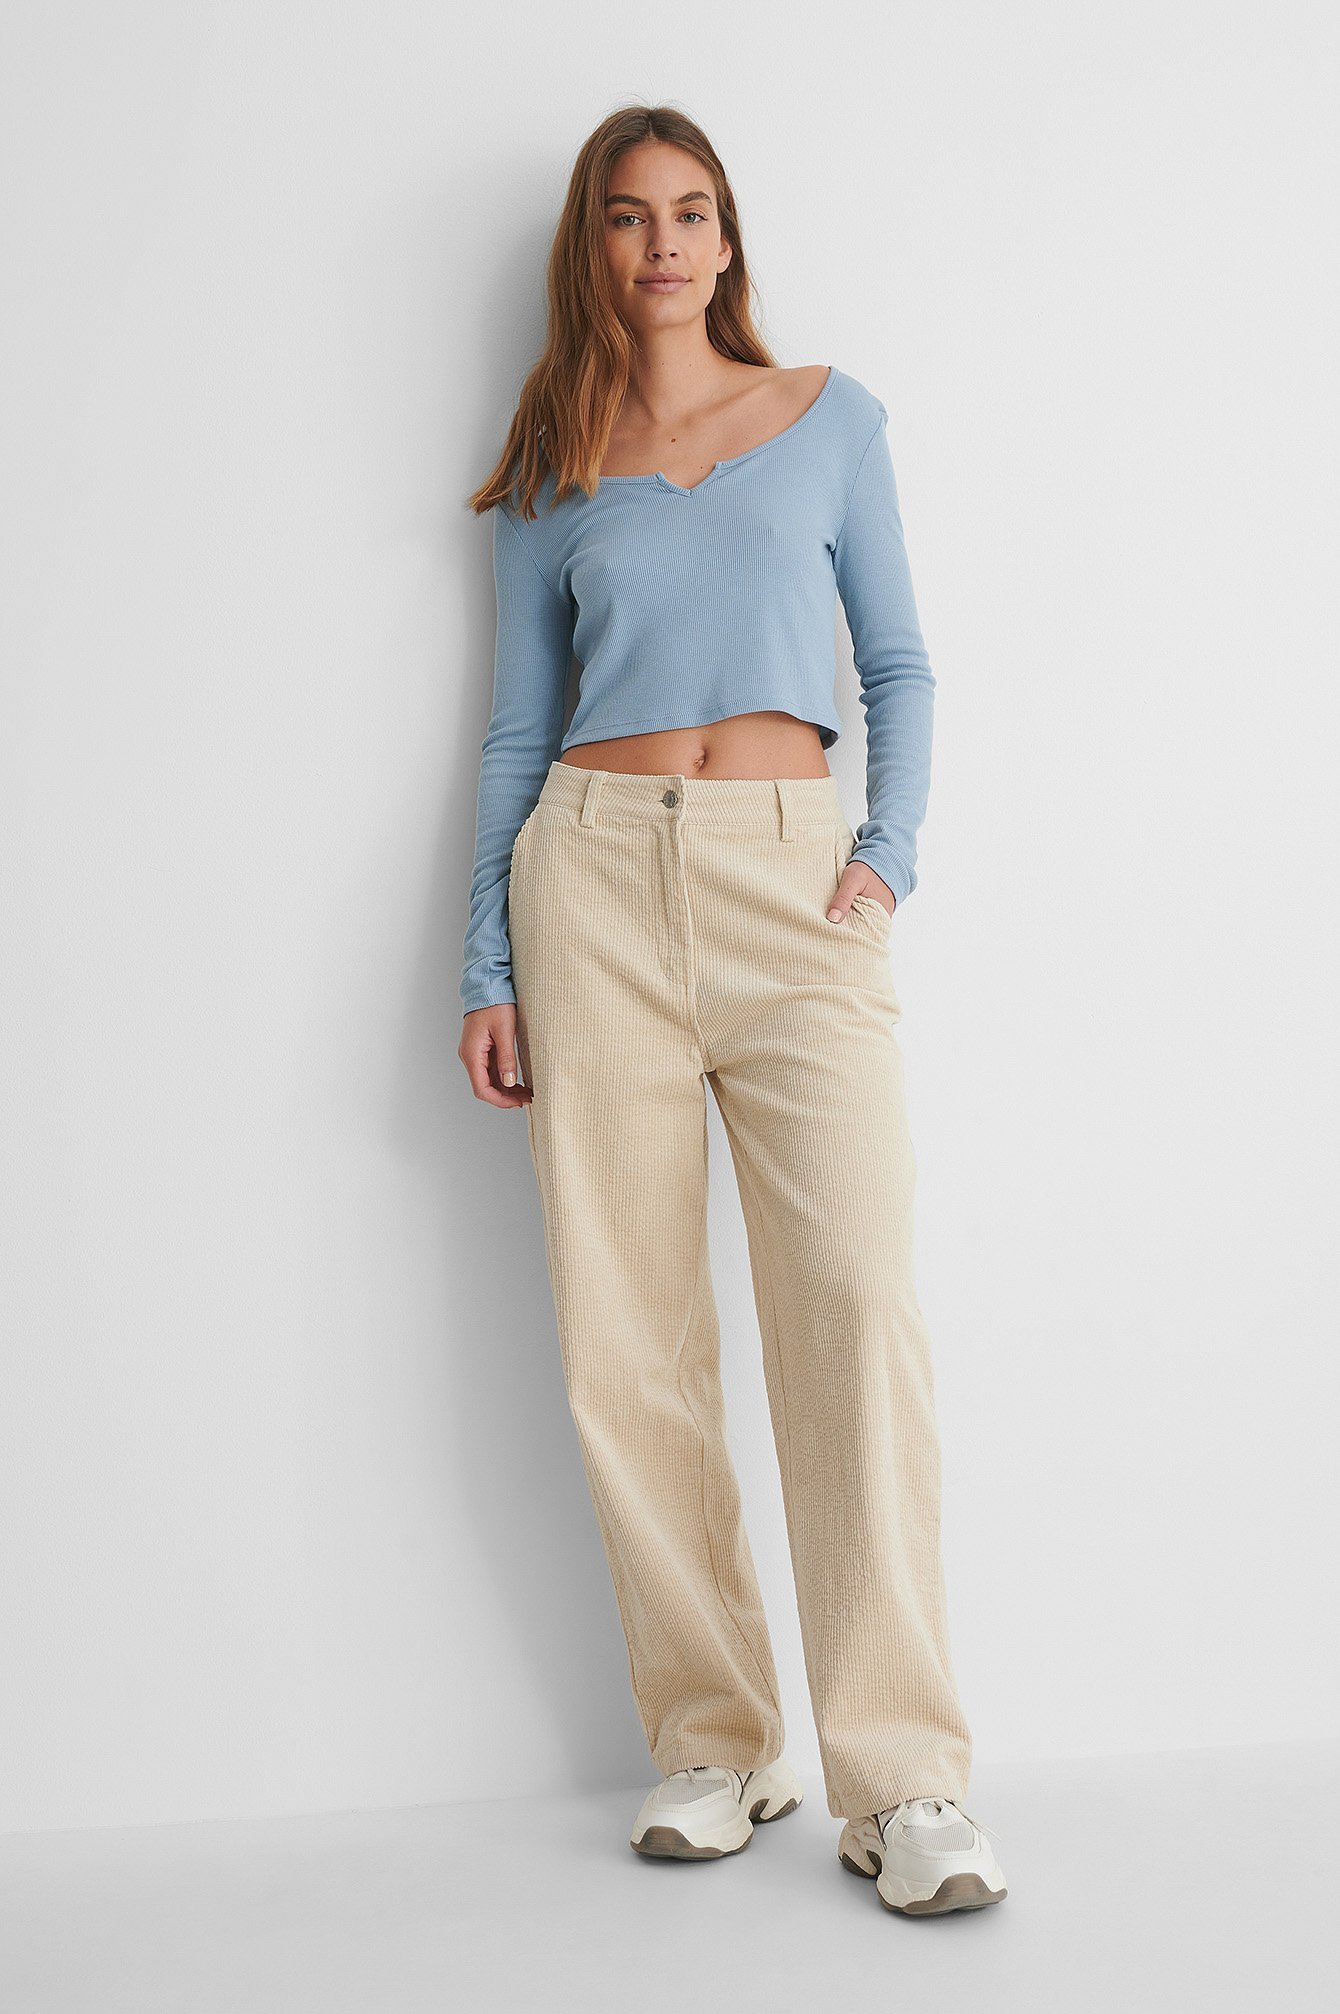 V-Neck Cropped Rib Top Outfit.